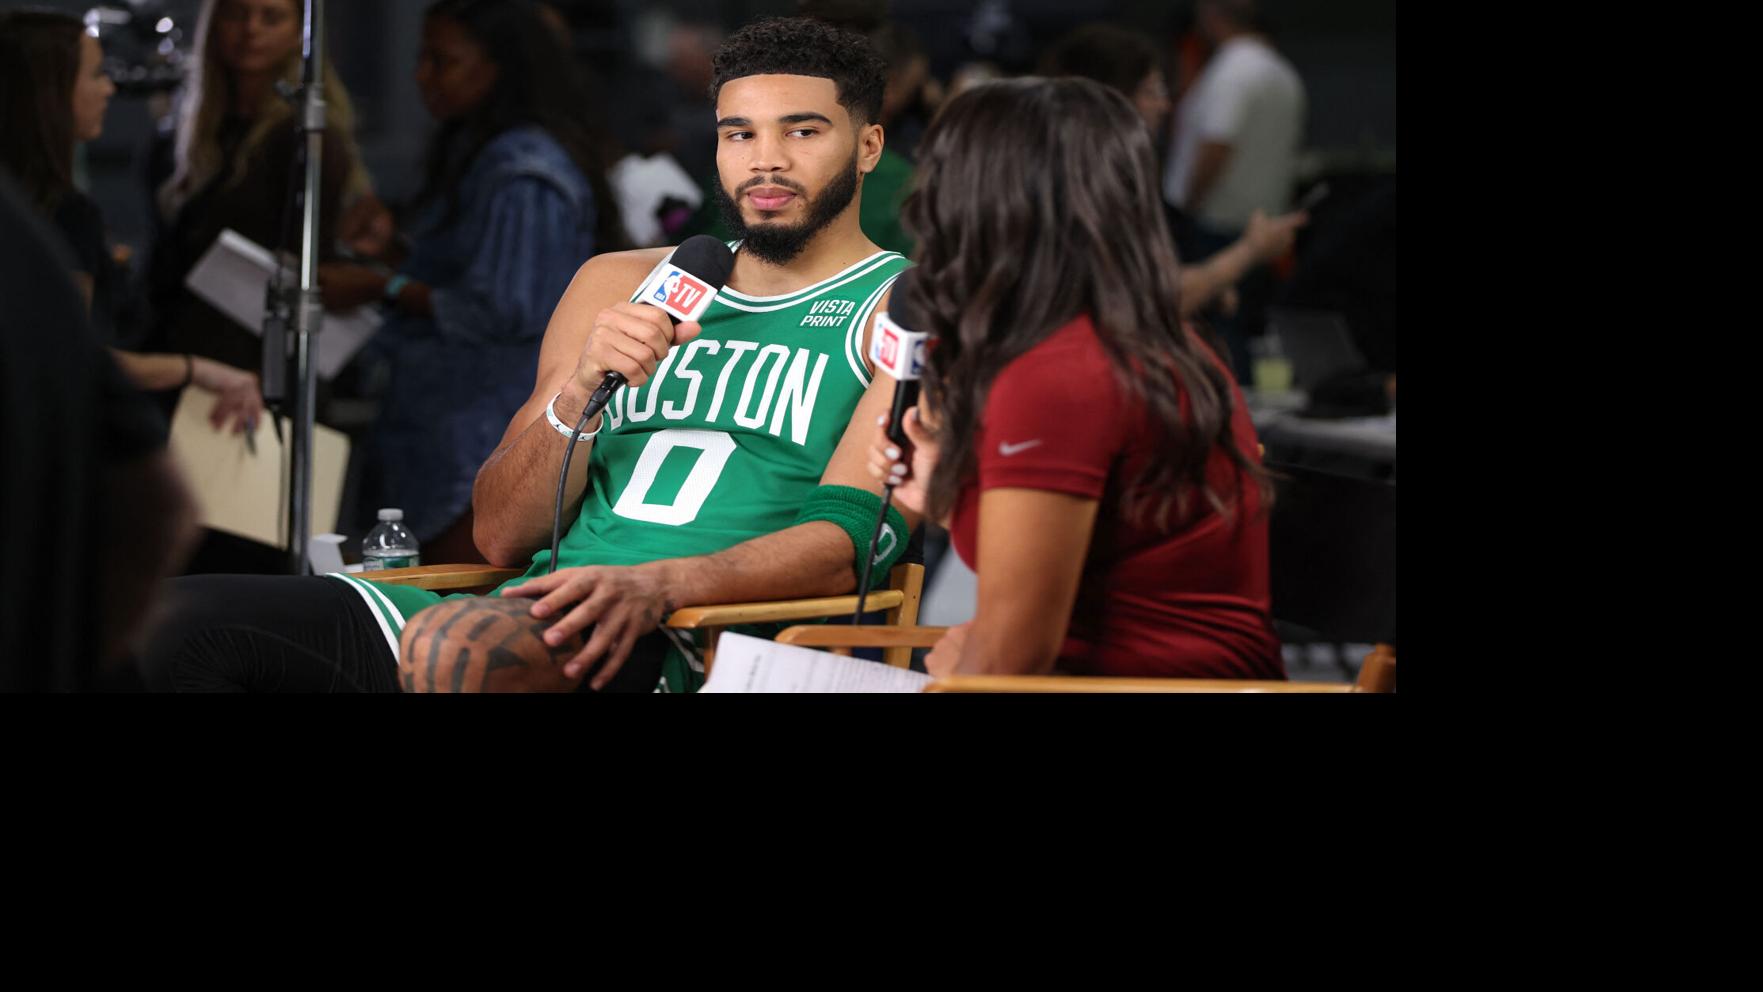 We were all shocked': Jayson Tatum, Jaylen Brown and Marcus Smart among  Celtics players to react to suspension of head coach Ime Udoka